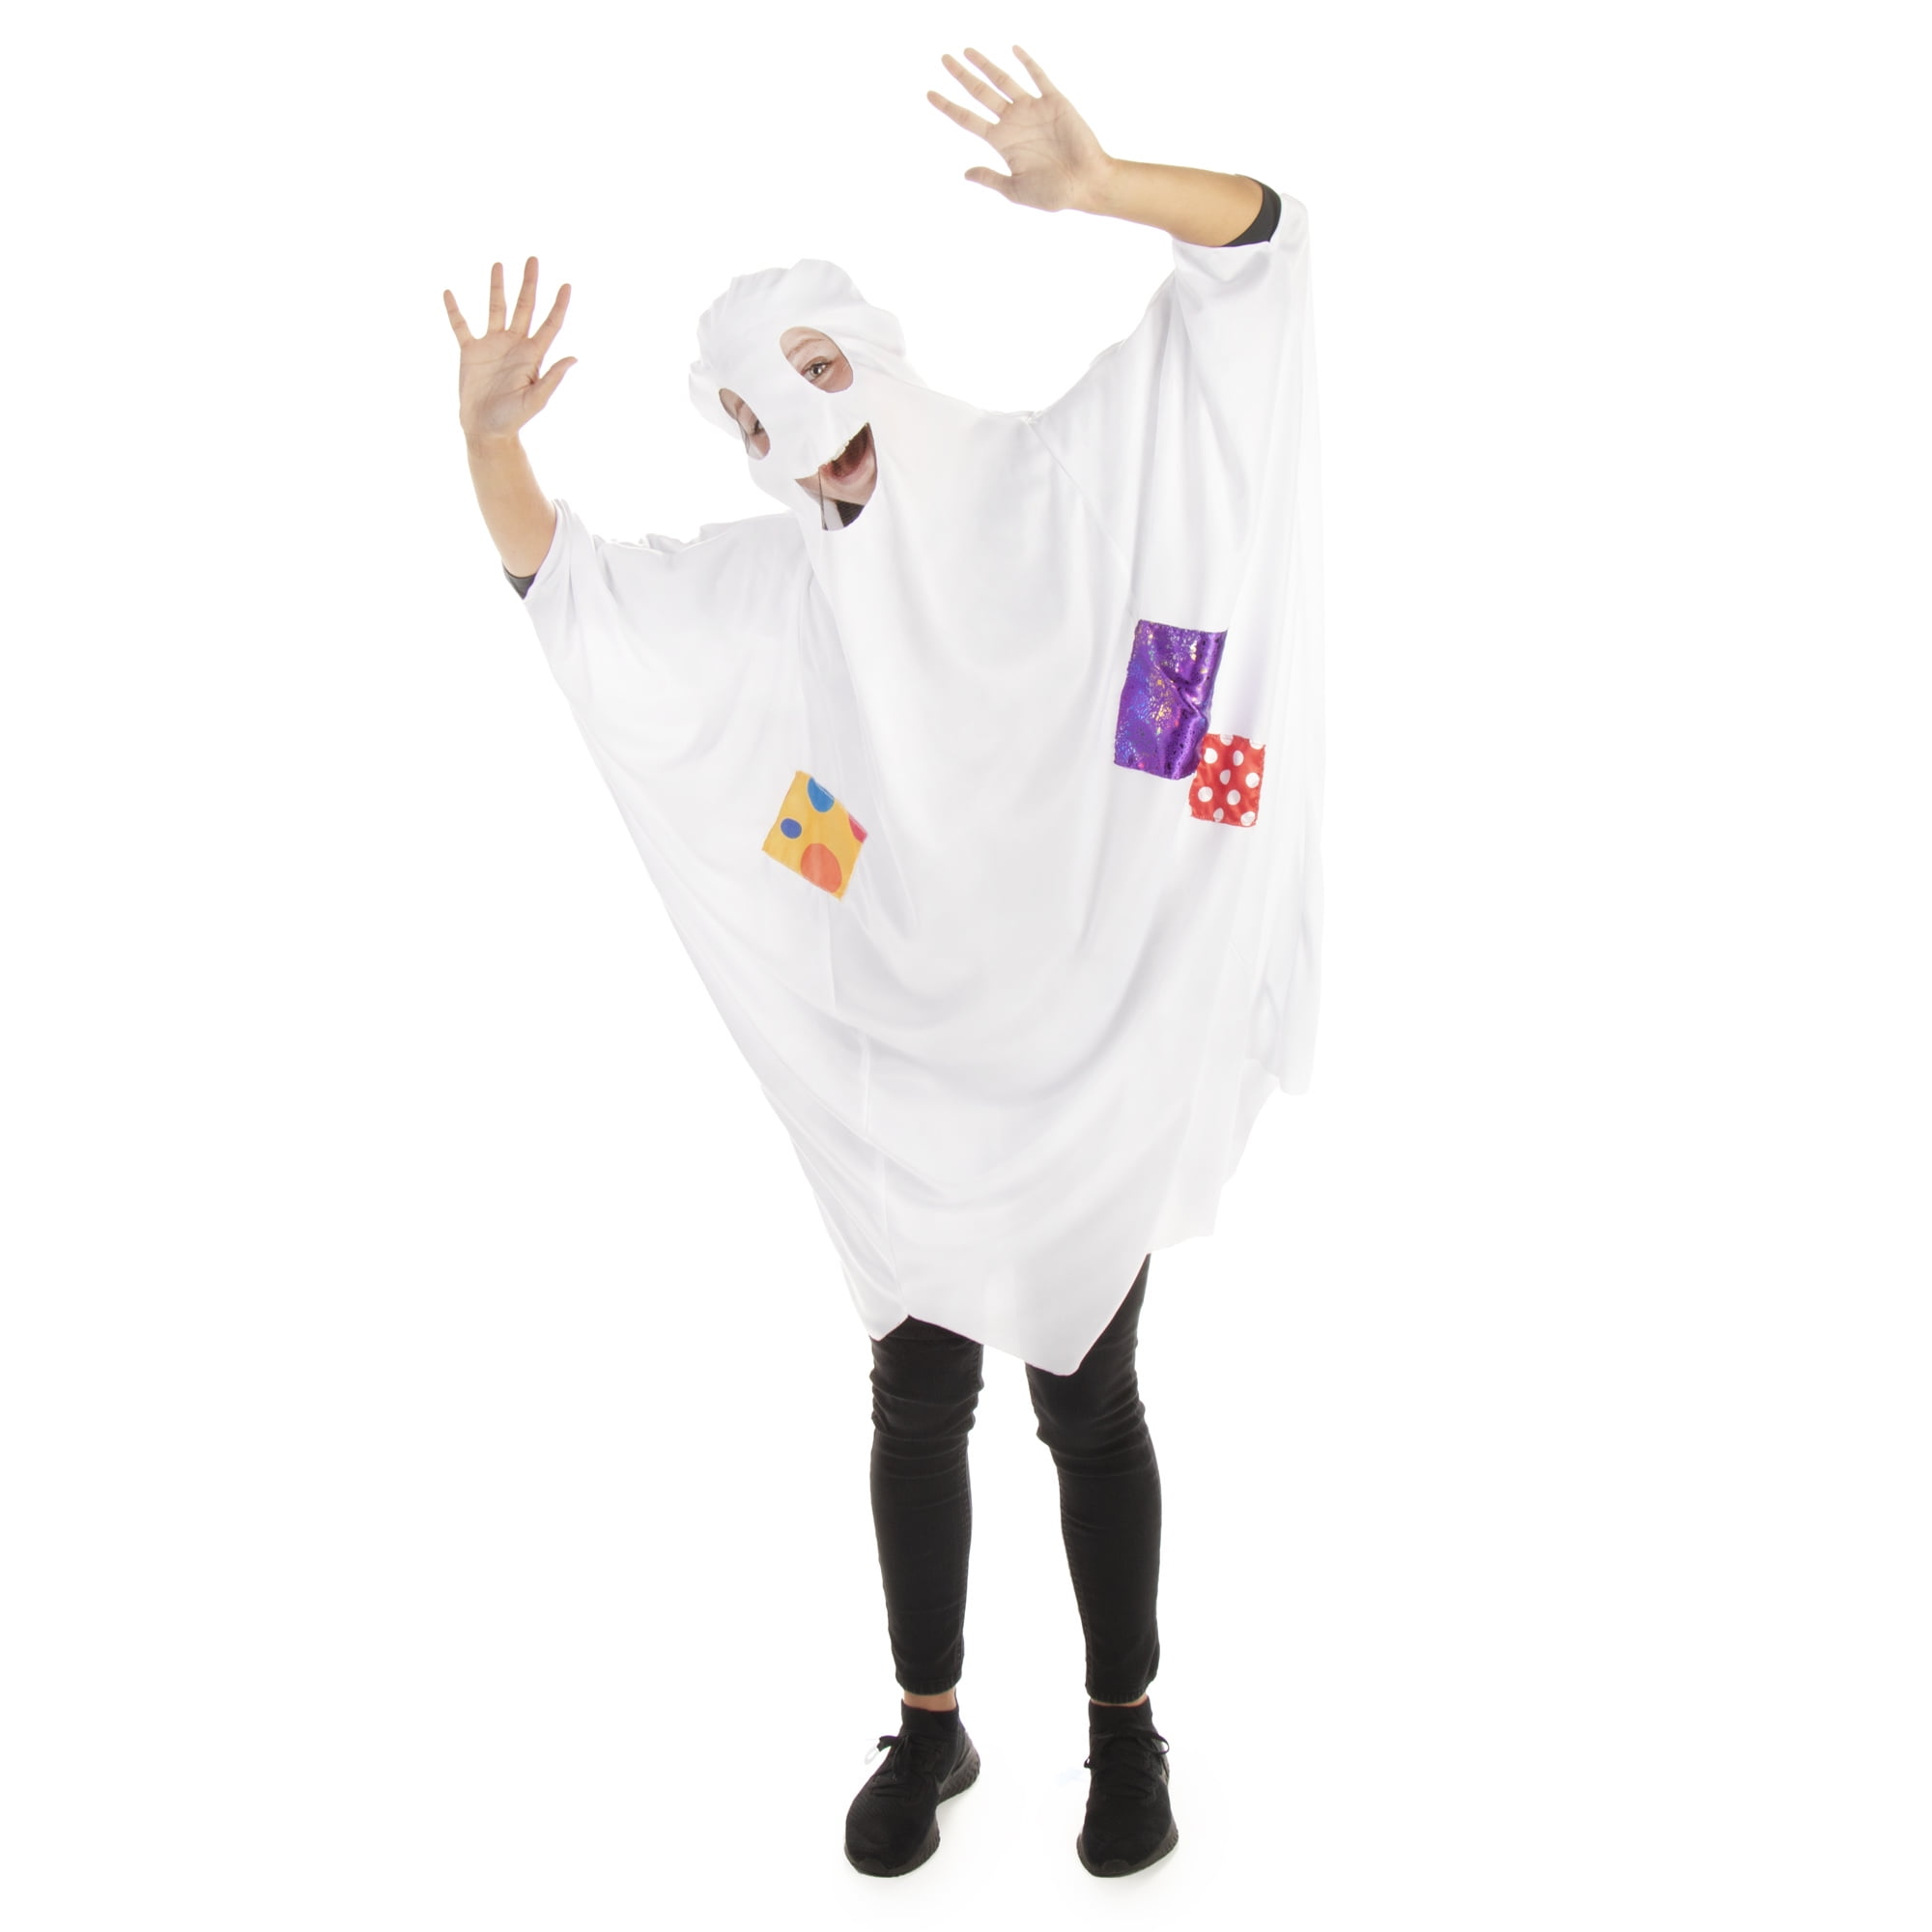 Adult Ghost Costume Halloween Ride On Pick Me Up Fancy Dress Outfit 